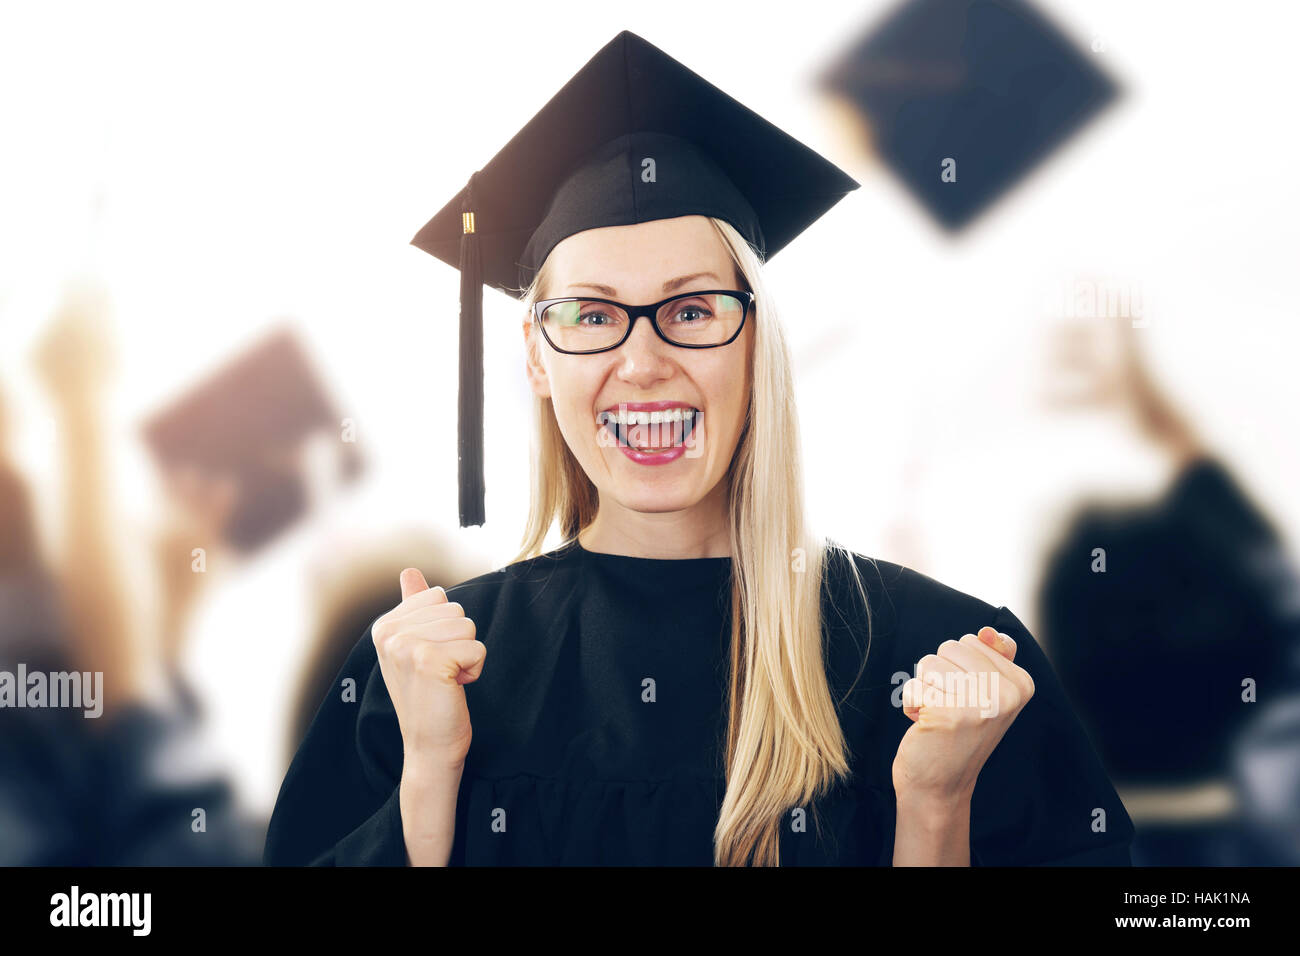 college graduation - happy woman wearing gown and cap celebrating Stock Photo